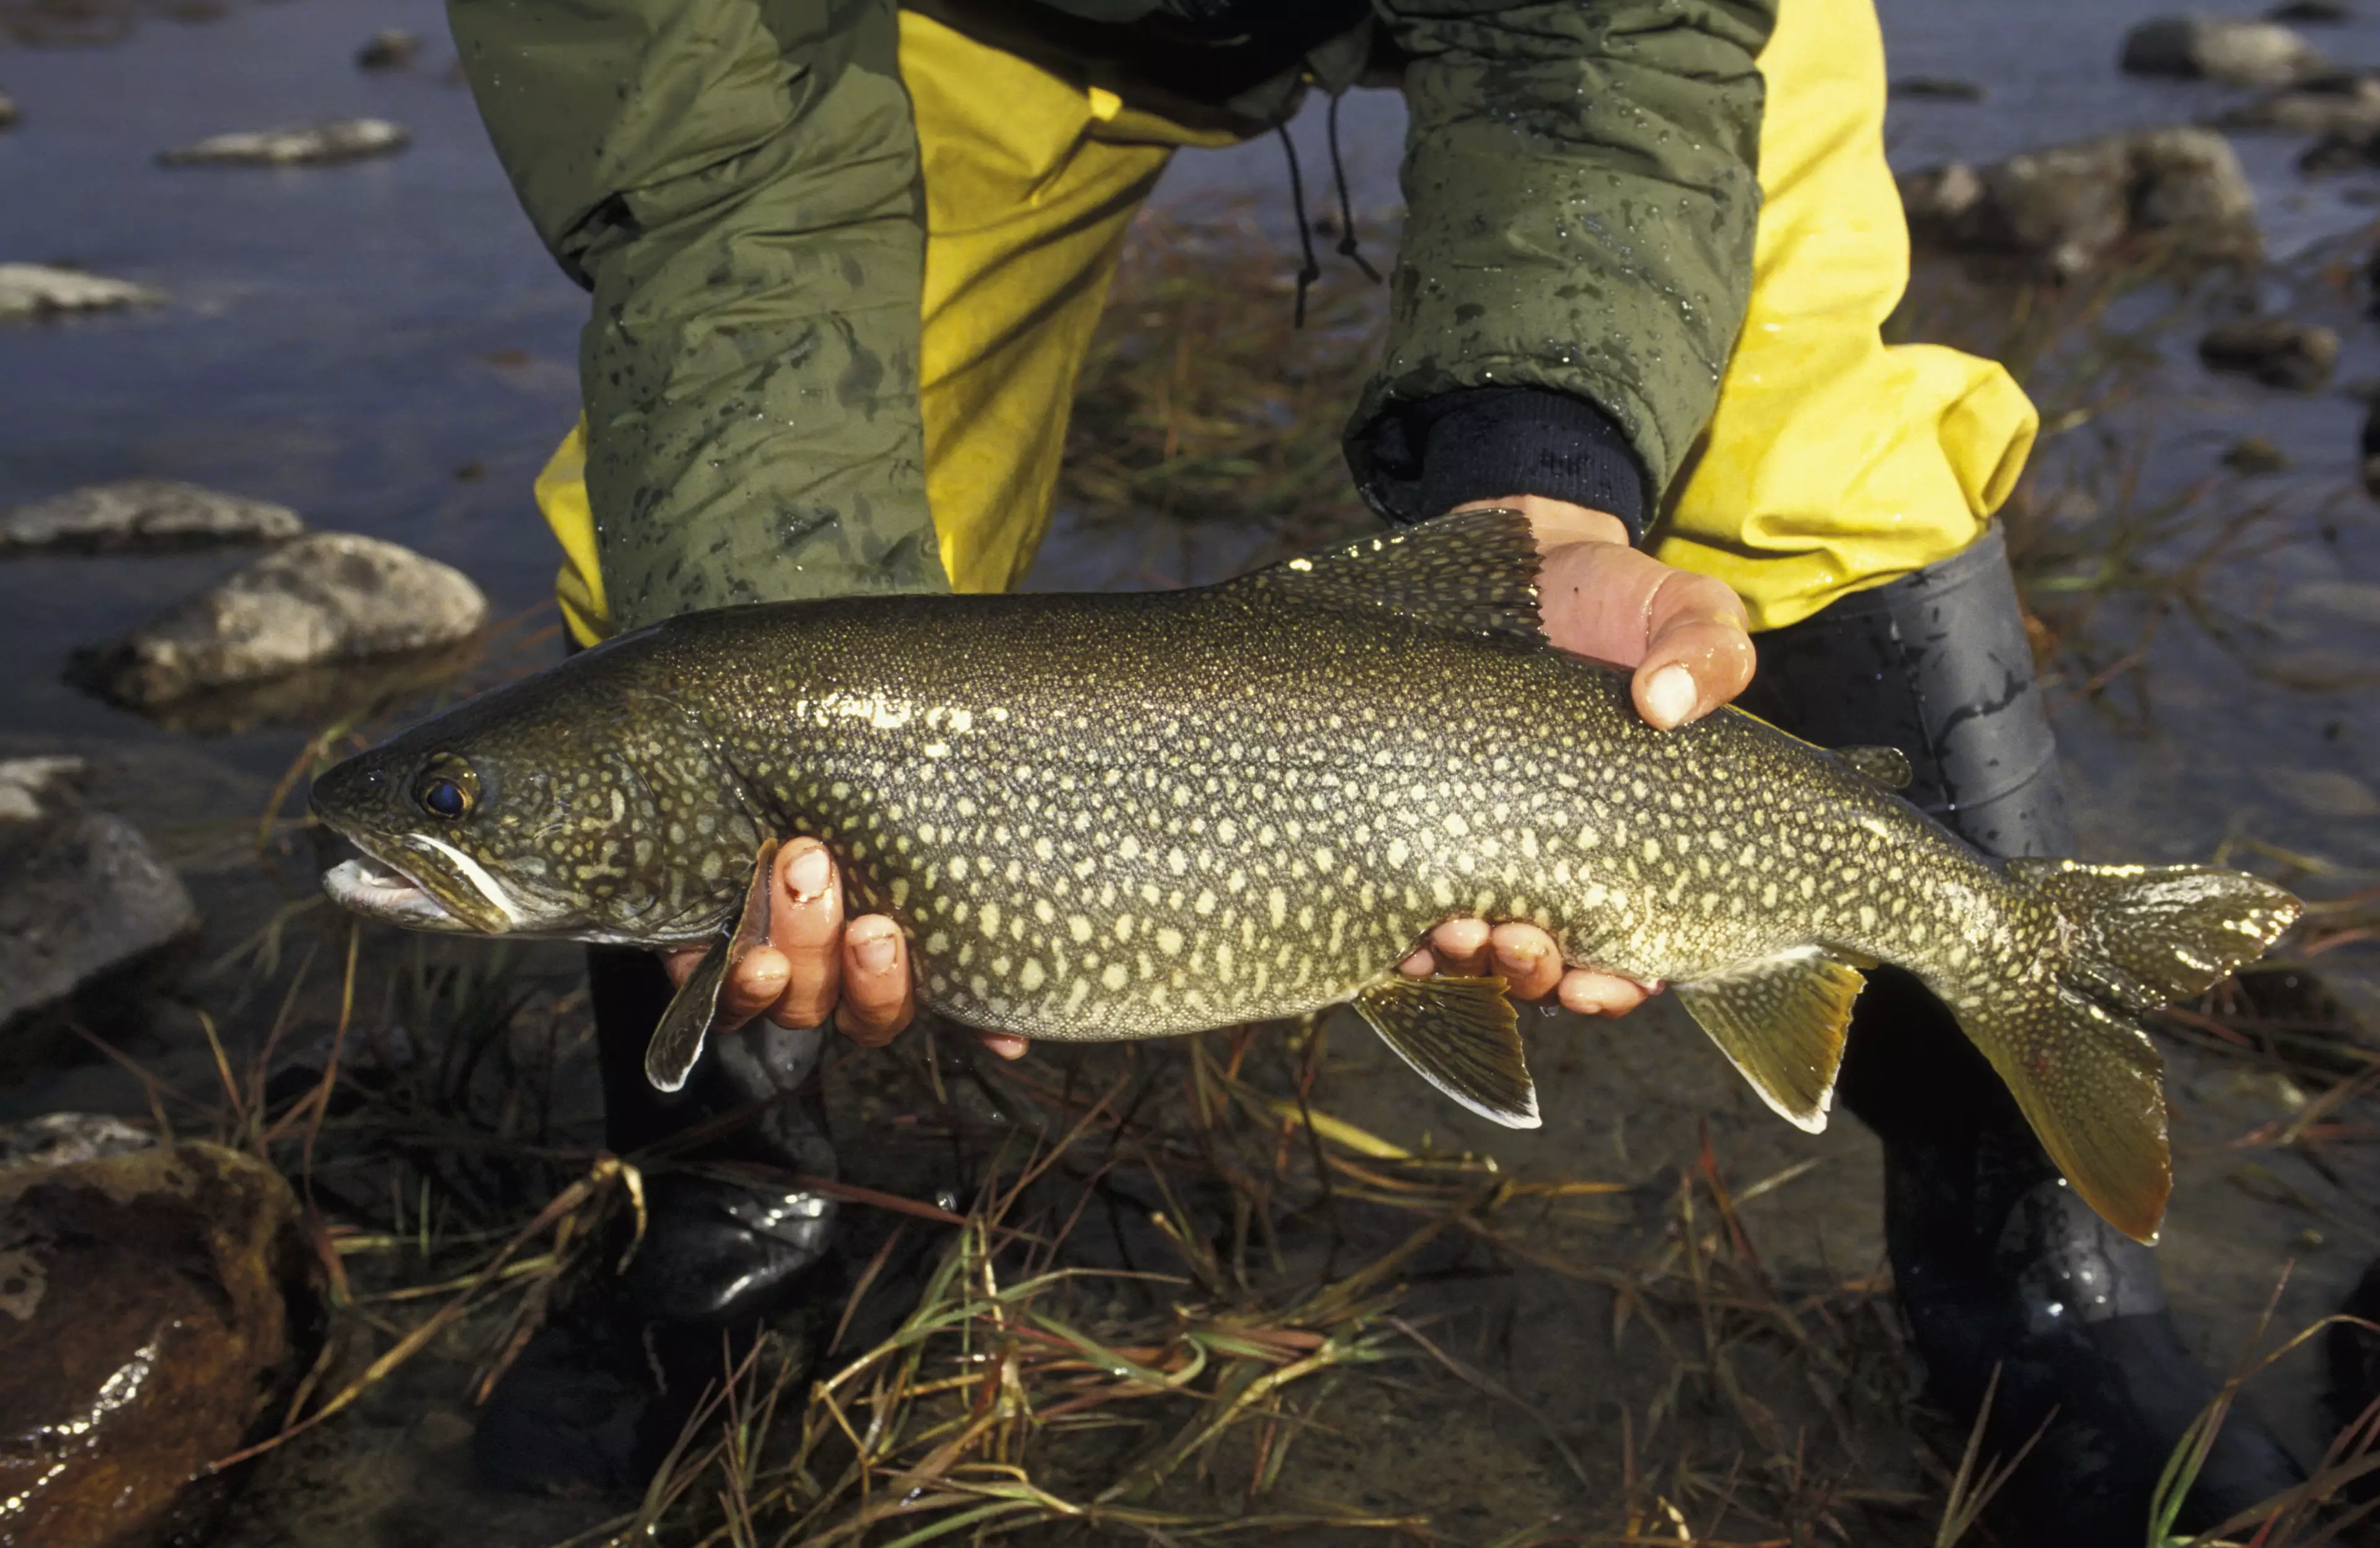 Here's a decent lake trout, for comparison.